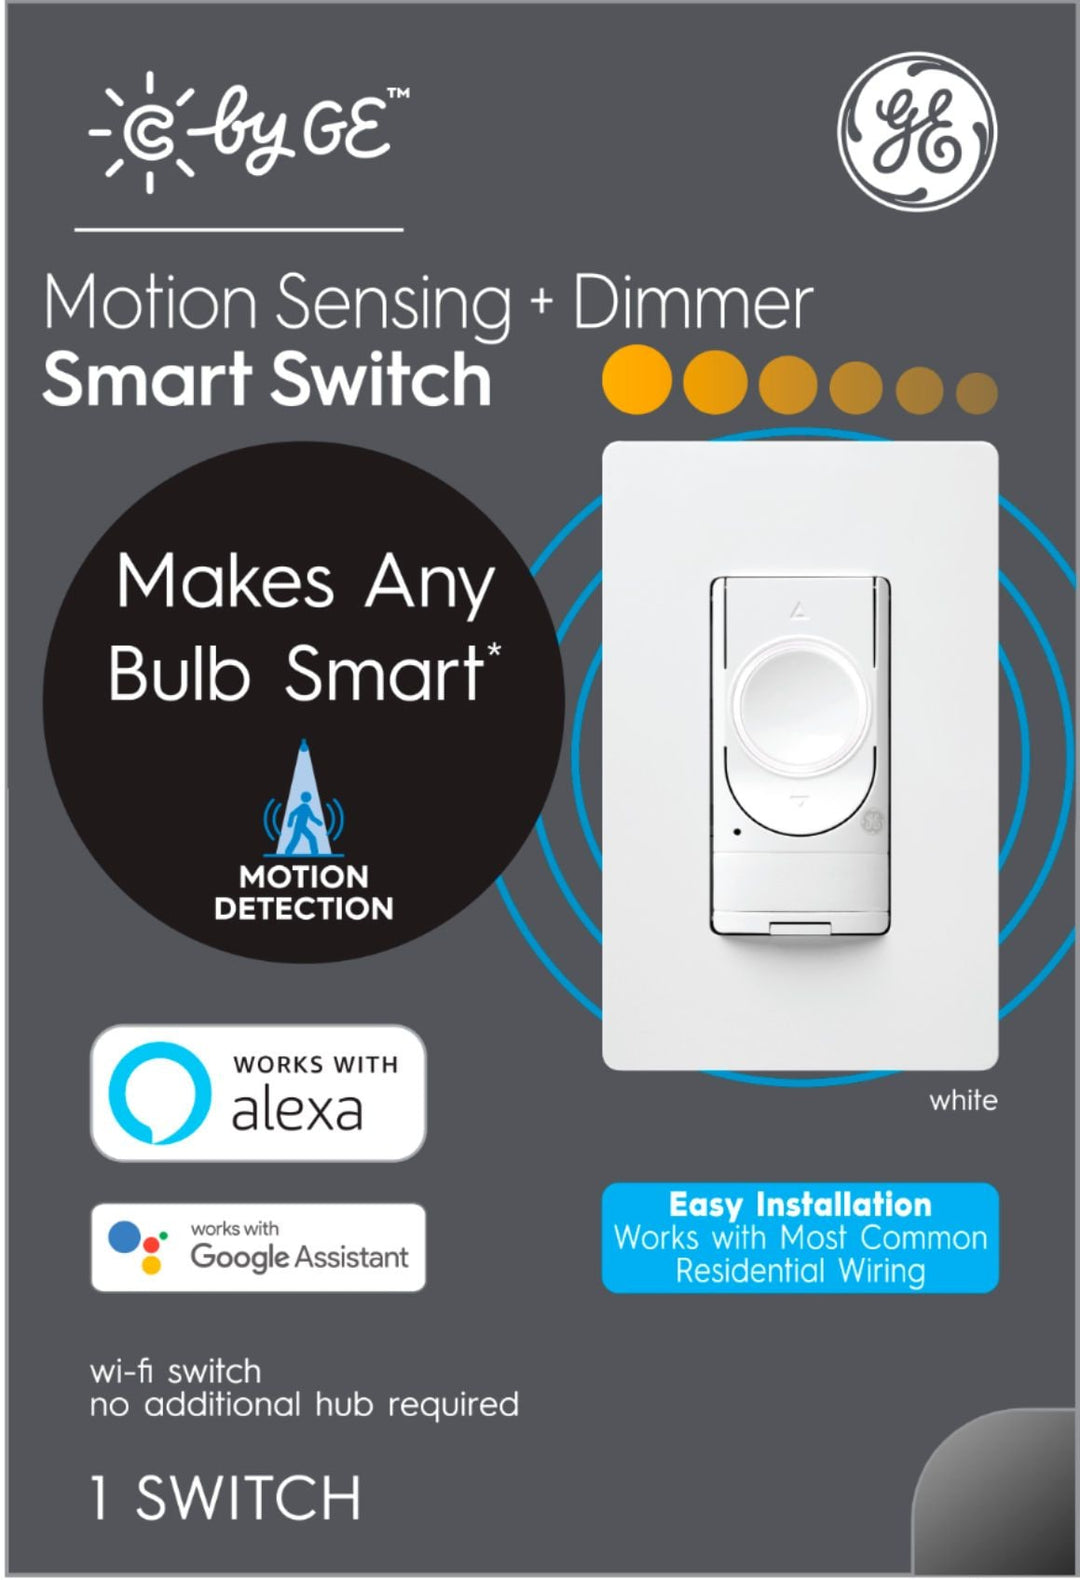 GE - CYNC Dimmer + Motion Sensor Smart Switch, No Neutral Wire Required, Bluetooth and 2.4 GHz Wifi (Packing May Vary) - White_4